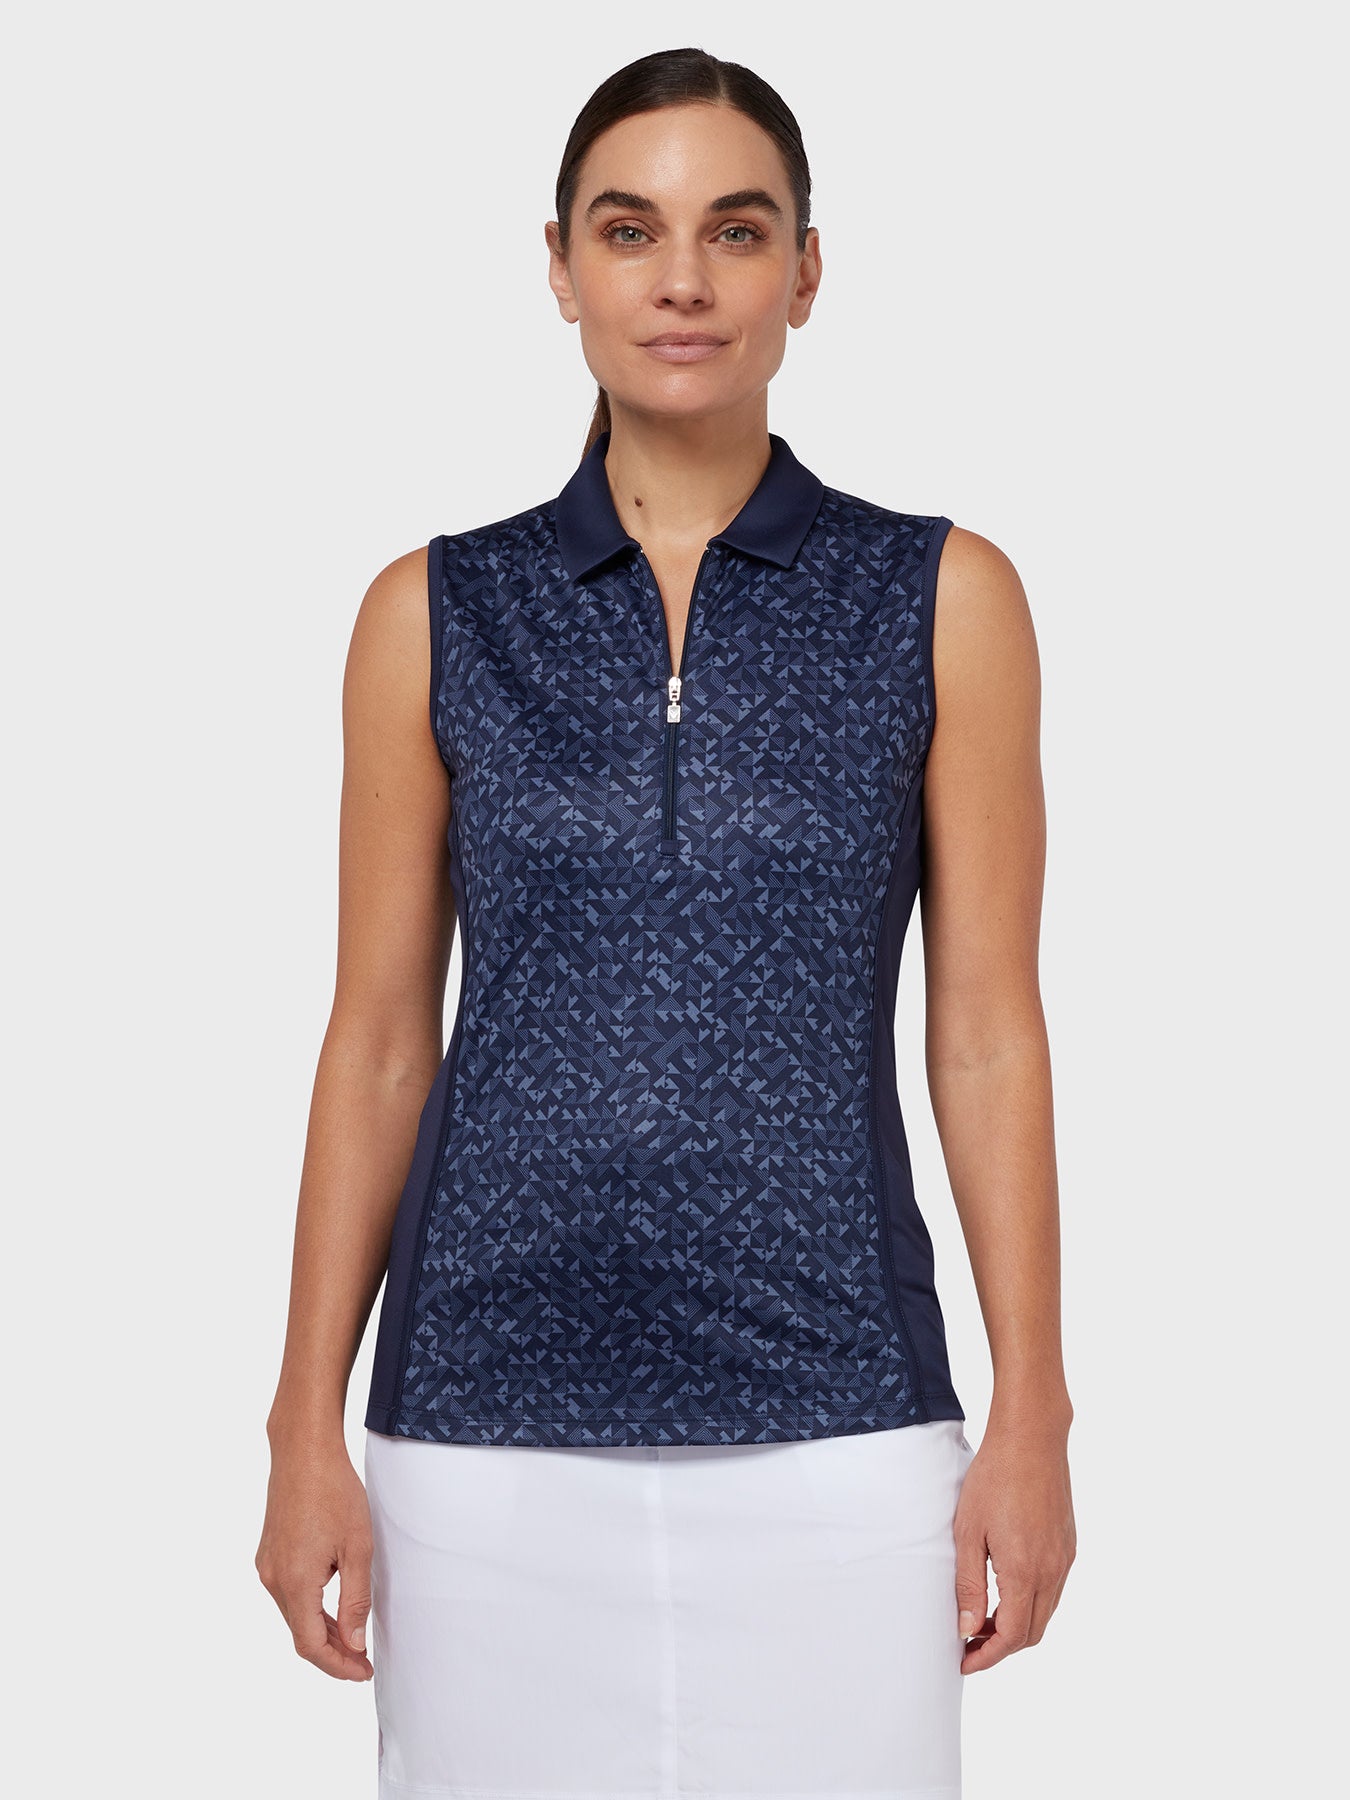 View Shape Shifter Geo Print Womens Golf Polo In Peacoat Peacoat XXL information